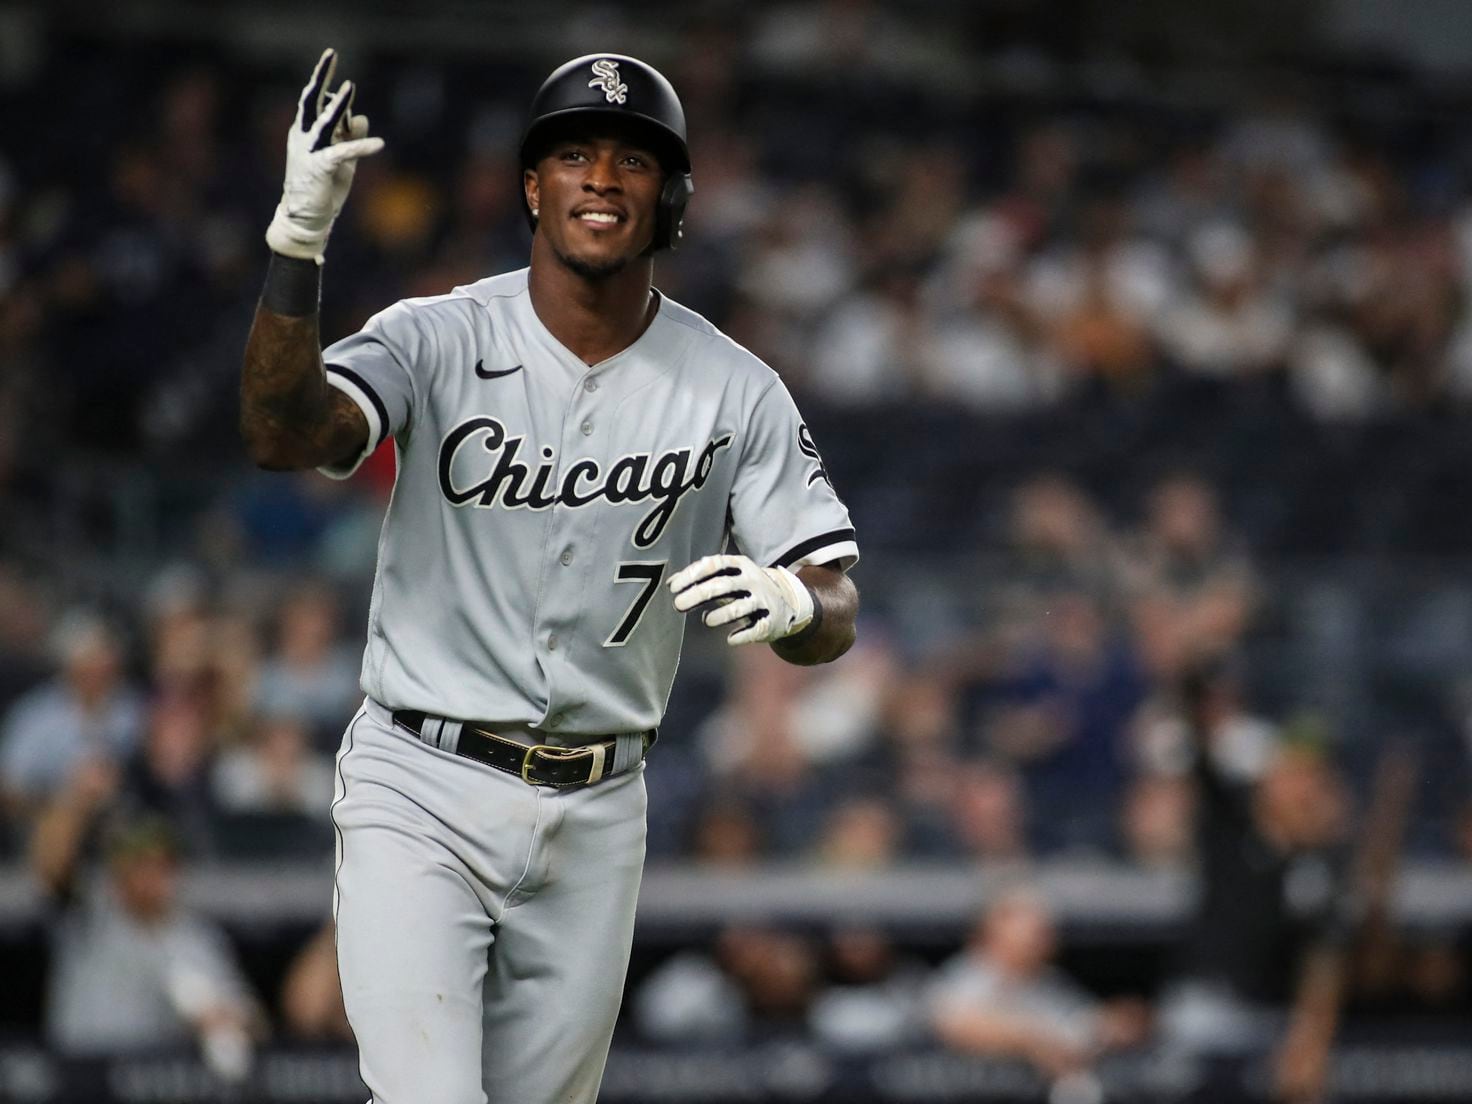 Statistics Support Keeping Tim Anderson As White Sox Shortstop